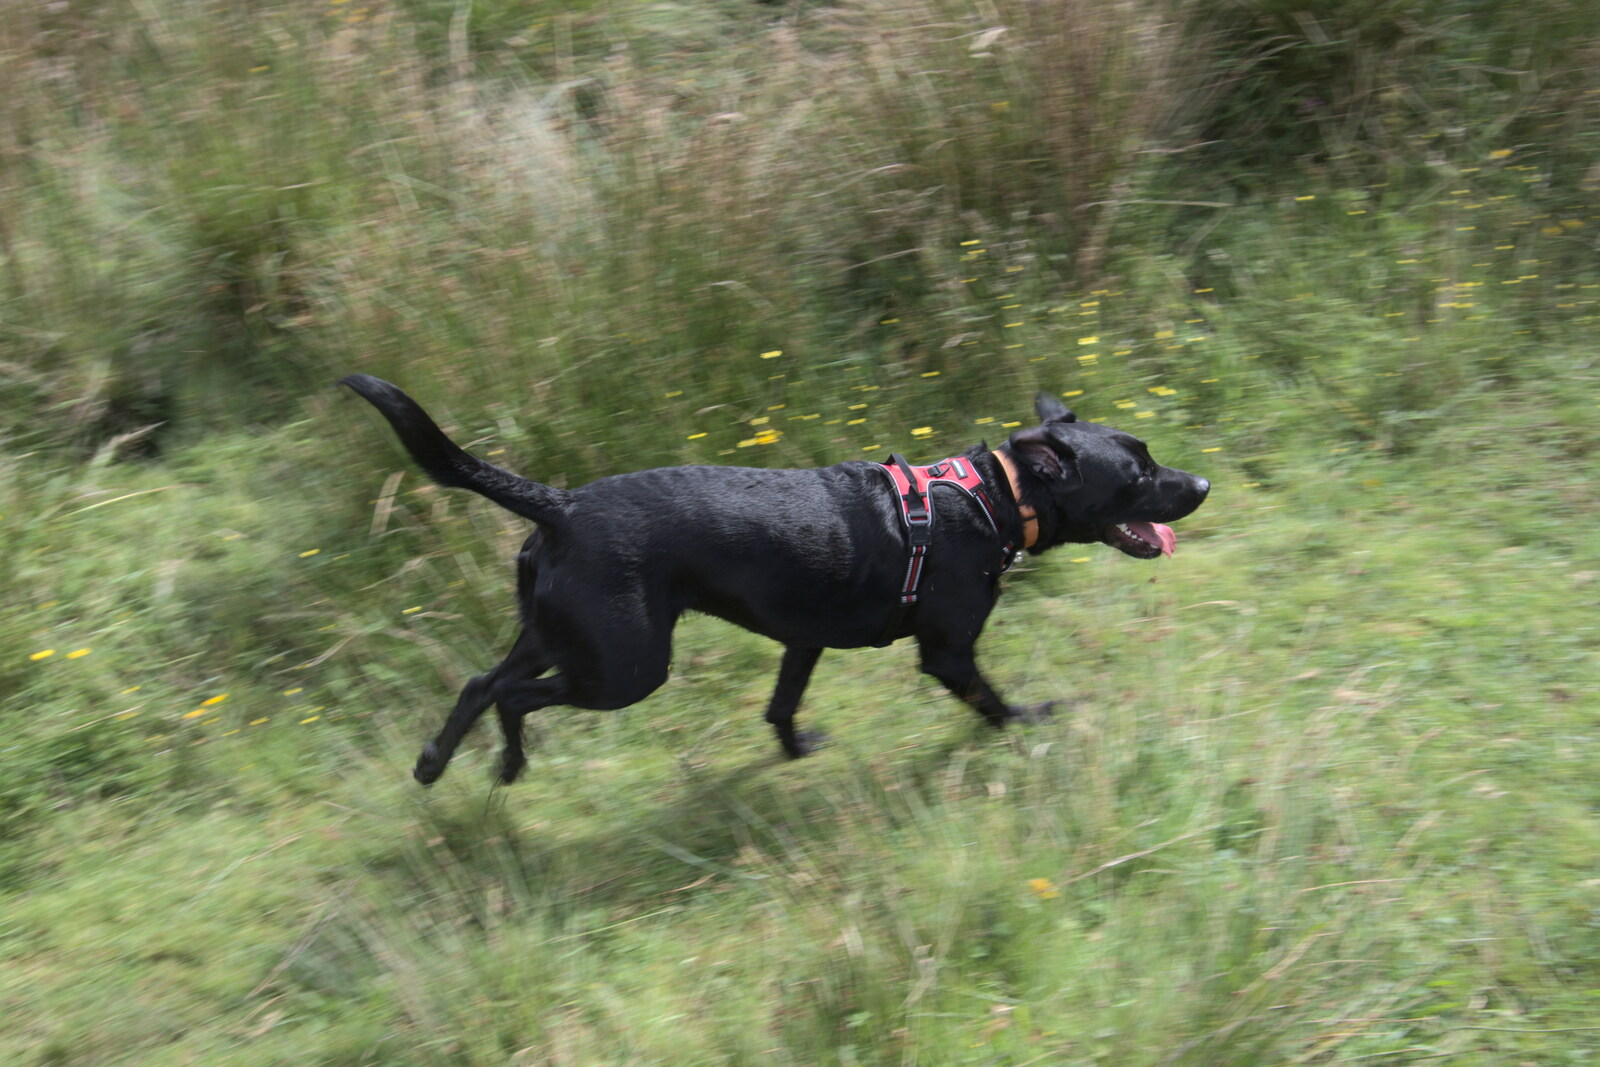 Doug the Dog runs around from A Game of Cricket, and a Walk Around Chagford, Devon - 23rd August 2020